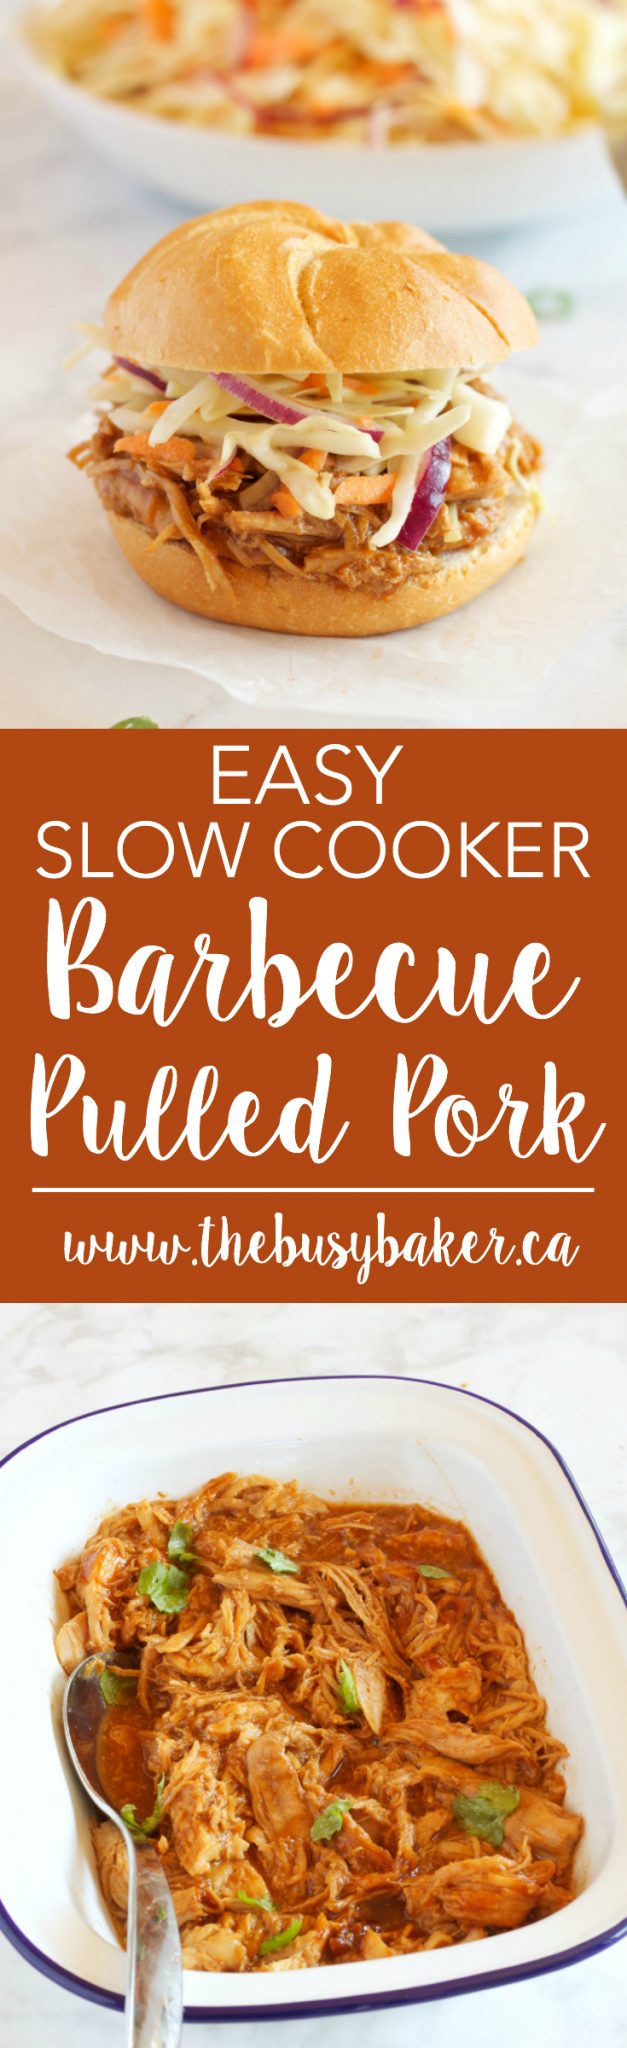 These Easy Slow Cooker Barbecue Pulled Pork Sandwiches feature a super easy 3-ingredient Slow Cooker Pulled Pork with an easy, healthy homemade coleslaw! Recipe from thebusybaker.ca! via @busybakerblog